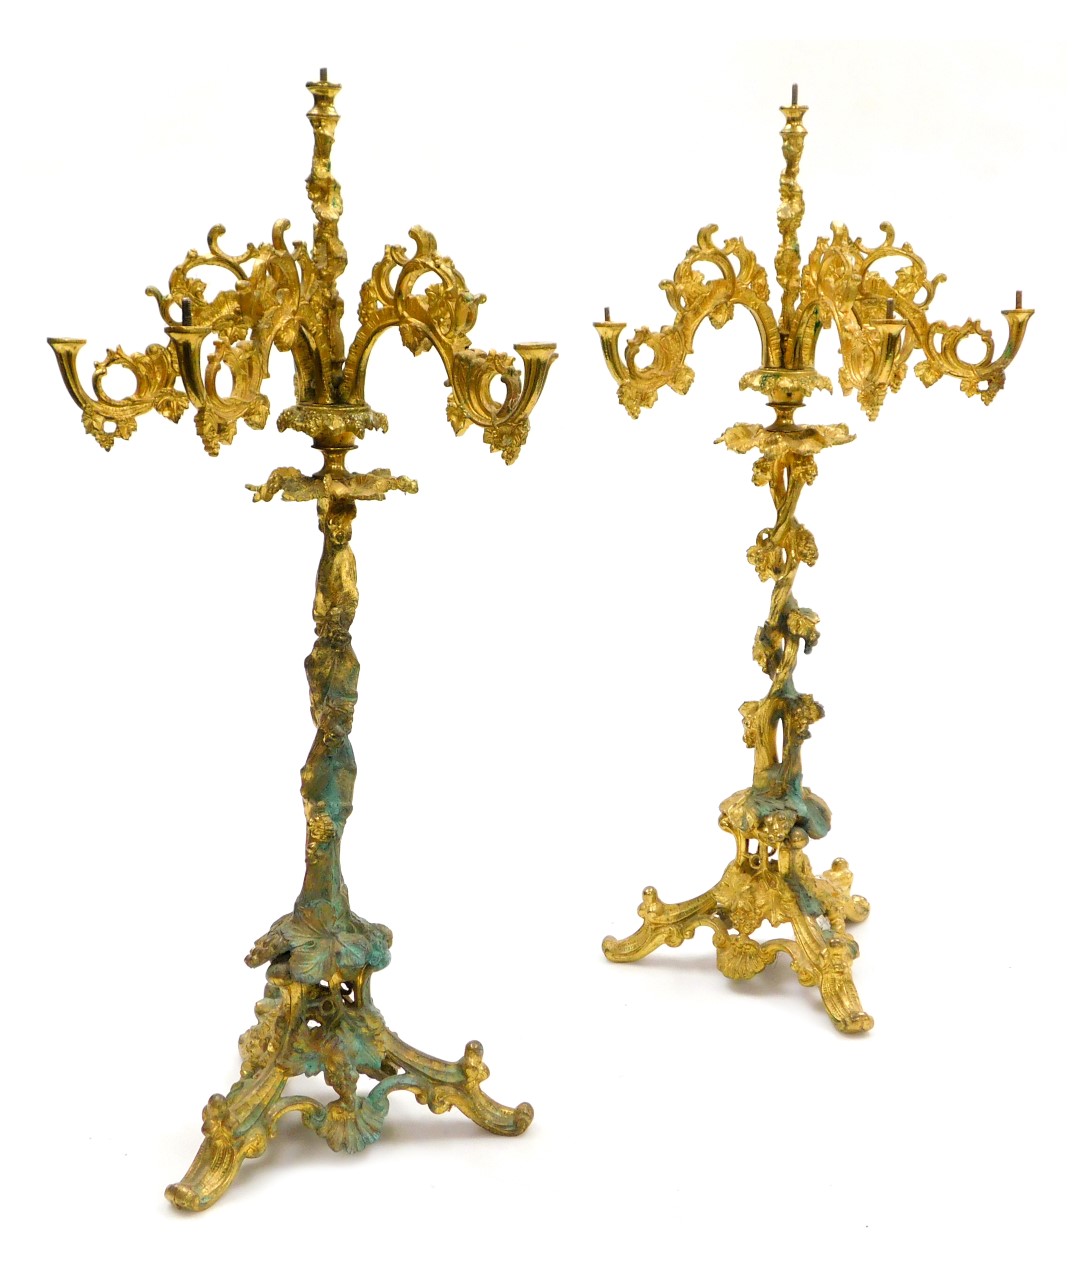 A pair of late 19thC brass five branch candelabra, sconces lacking, cast as vines, 58cm high.